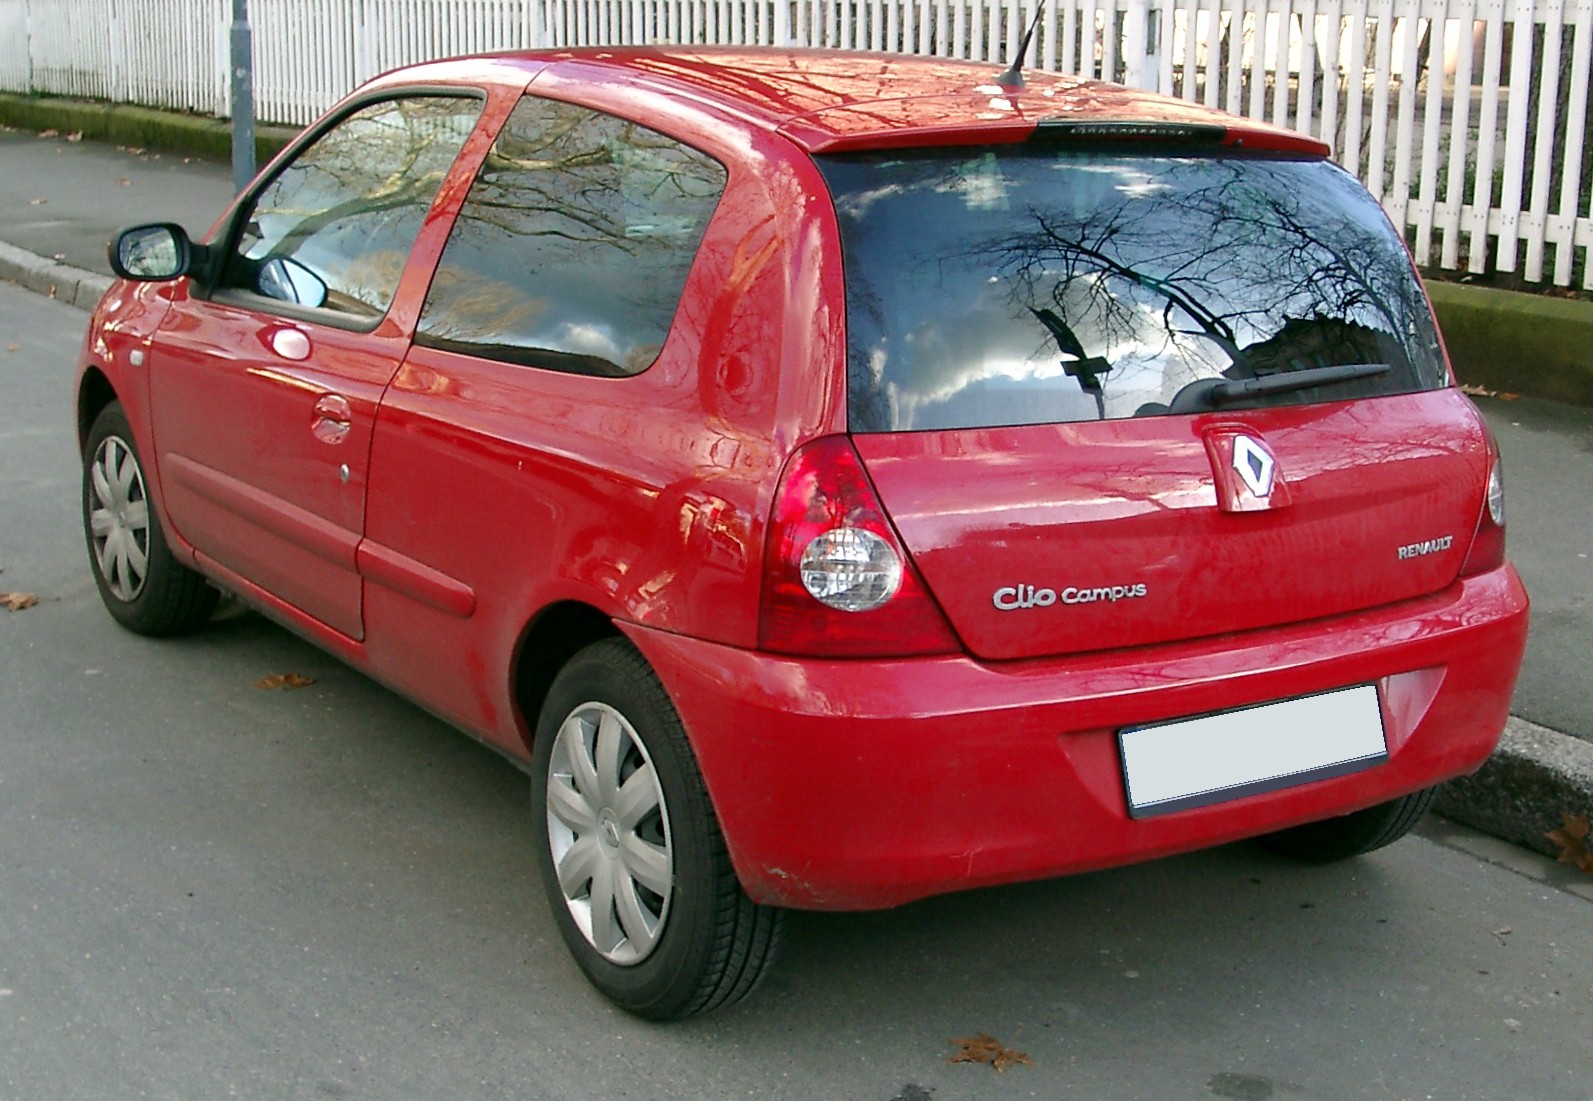 http://fr.academic.ru/pictures/frwiki/82/Renault_Clio_rear_20080202.jpg